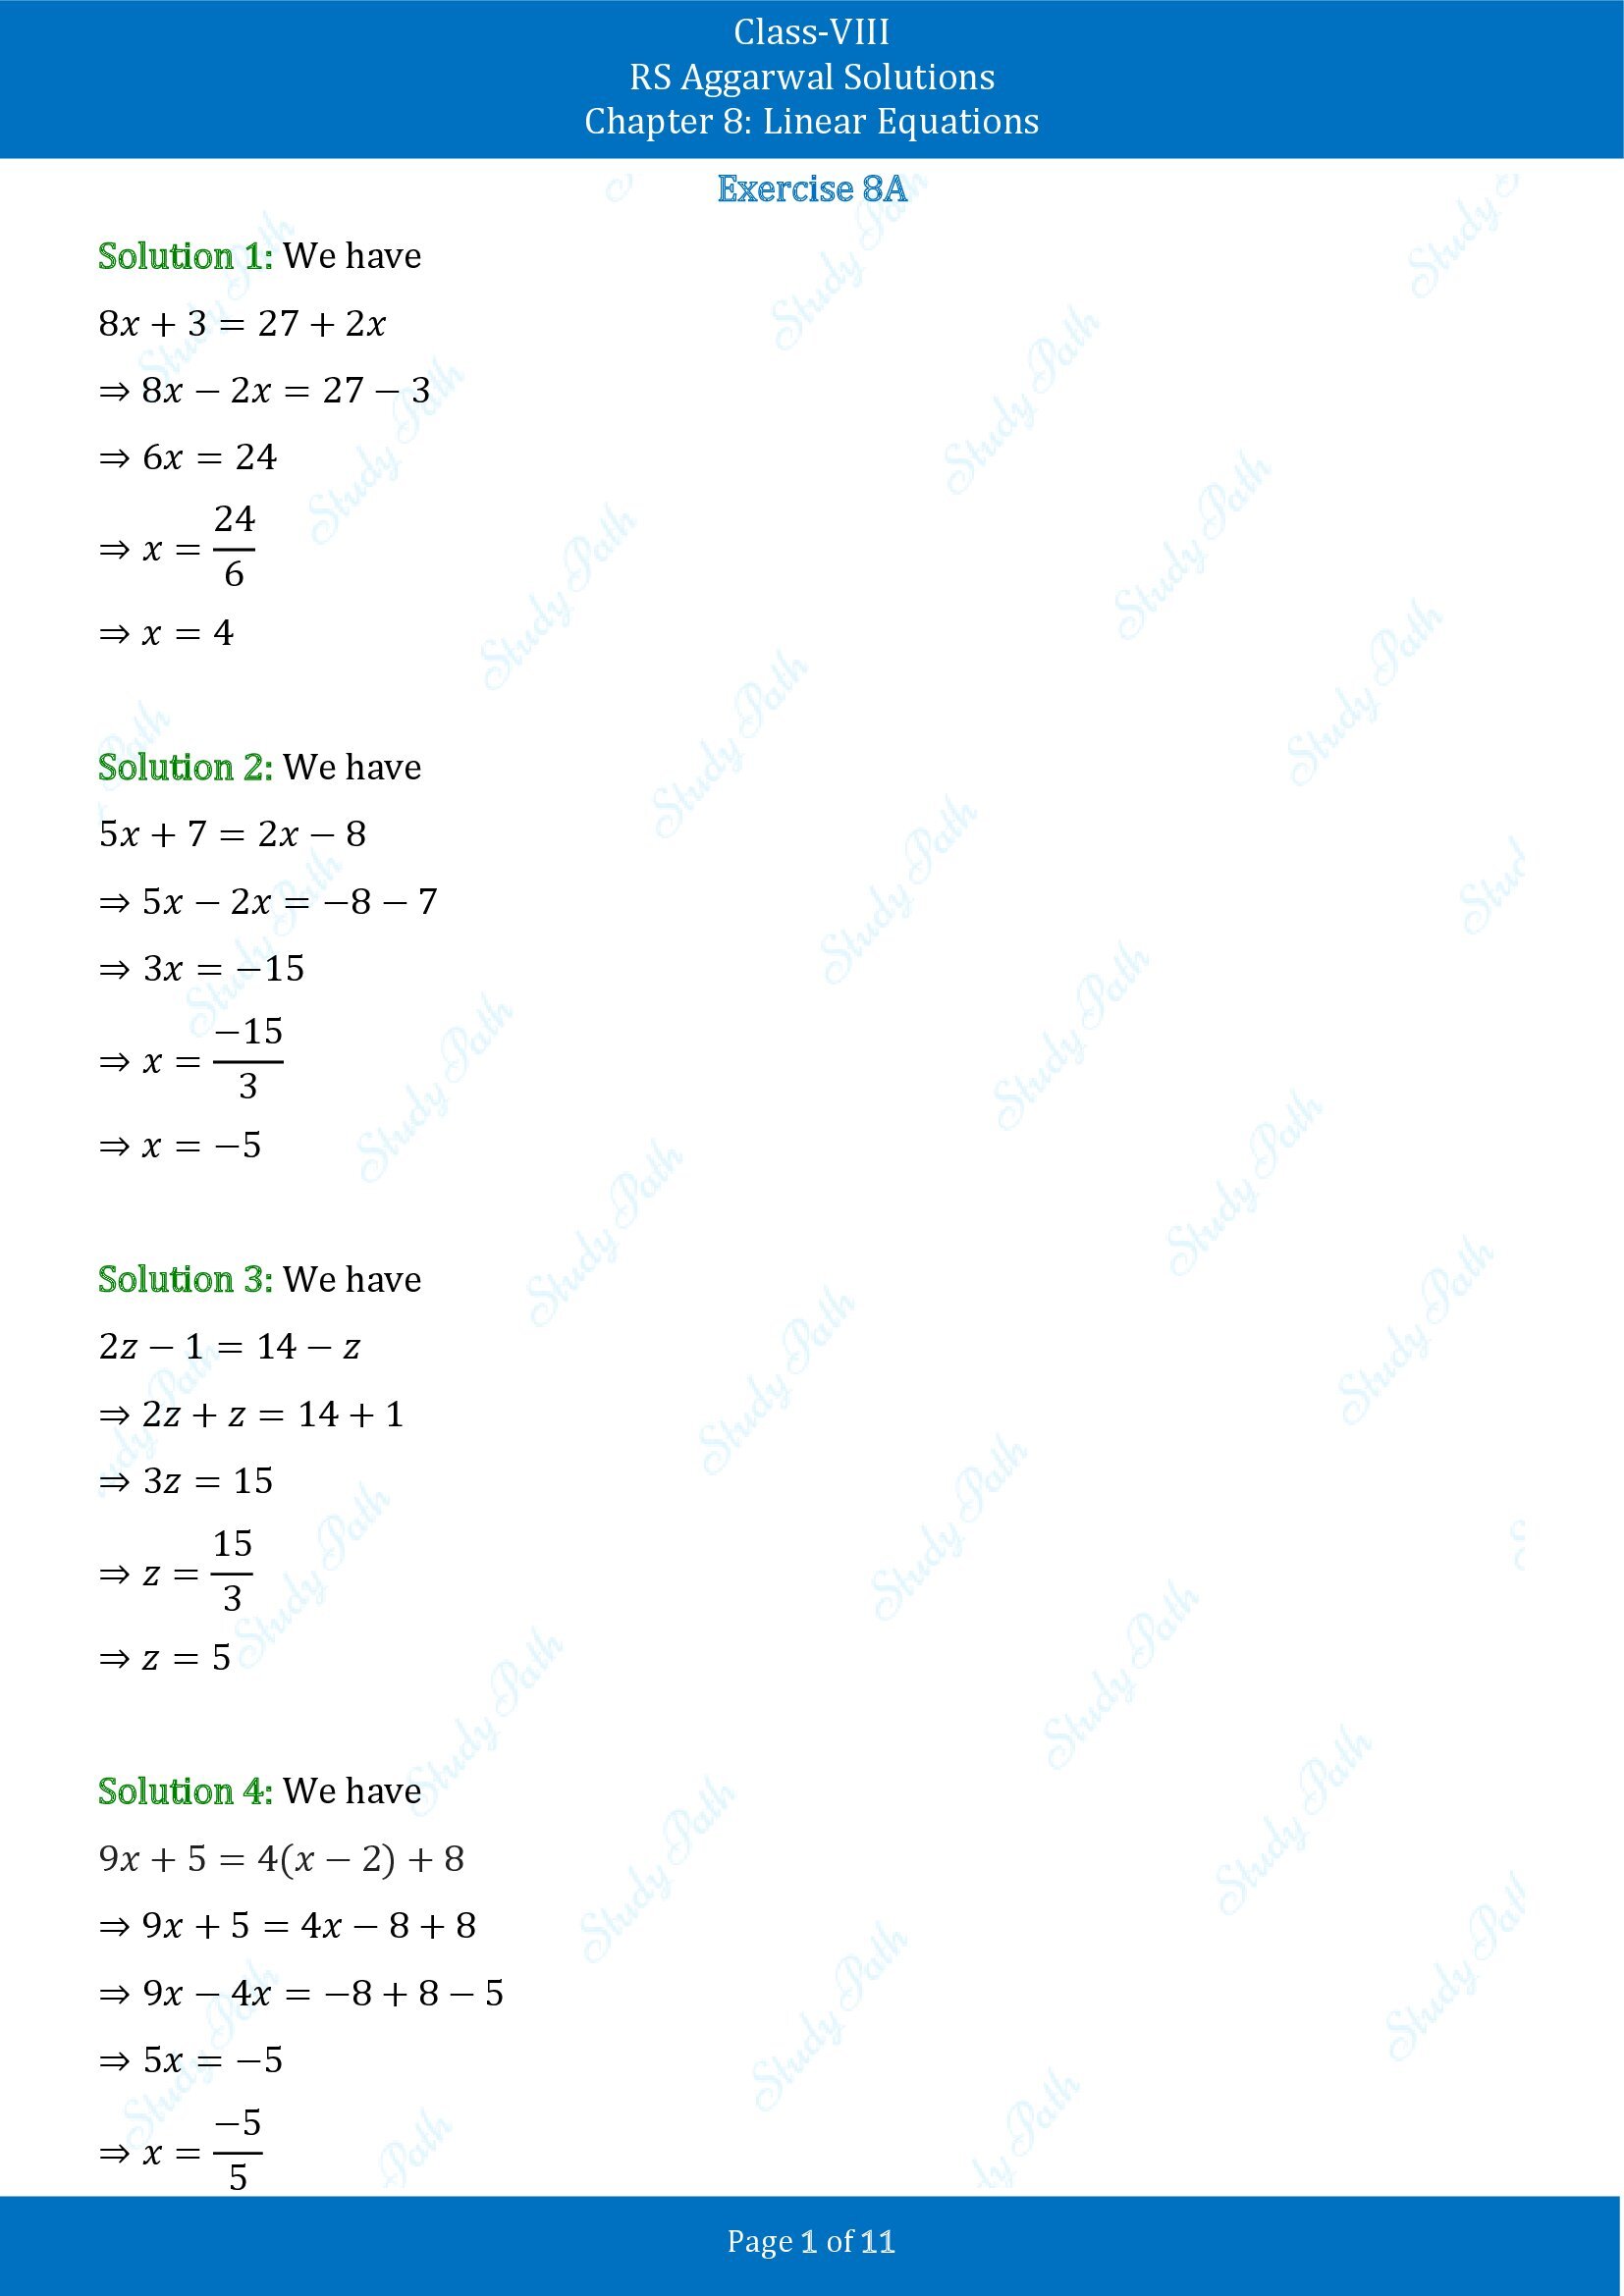 RS Aggarwal Solutions Class 8 Chapter 8 Linear Equations Exercise 8A 00001